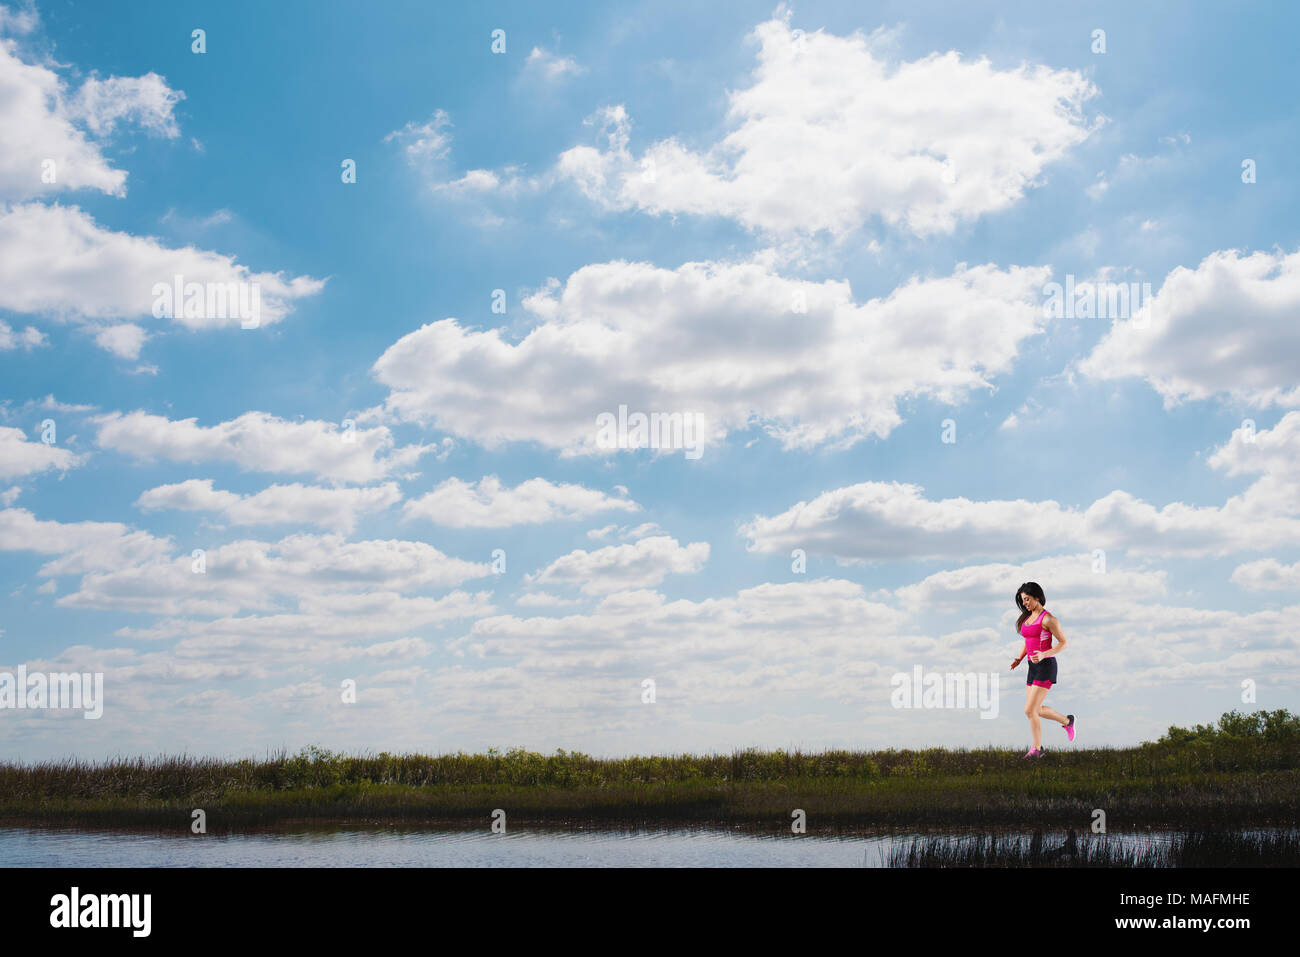 Running girl on a green field and bright sky Stock Photo